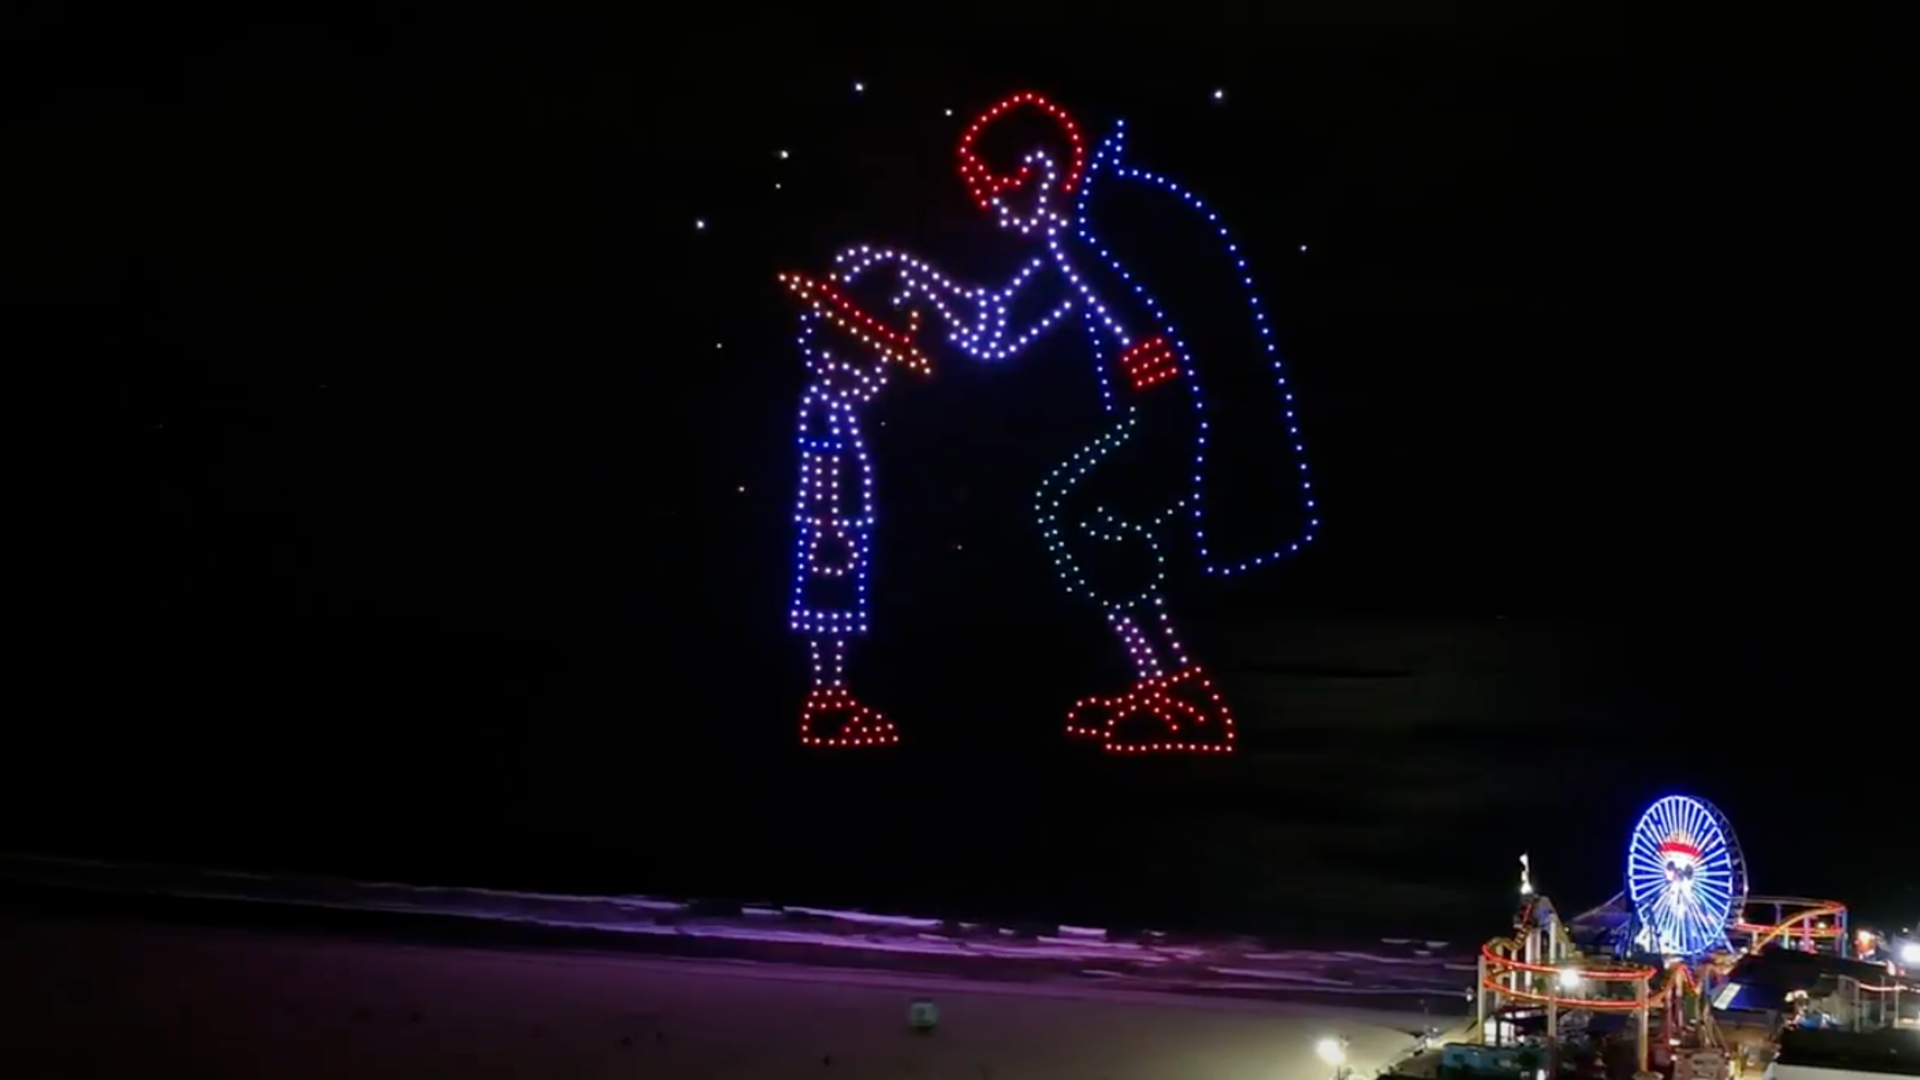 The Netflix Premier Drone Light Show for One Piece in Santa Monica